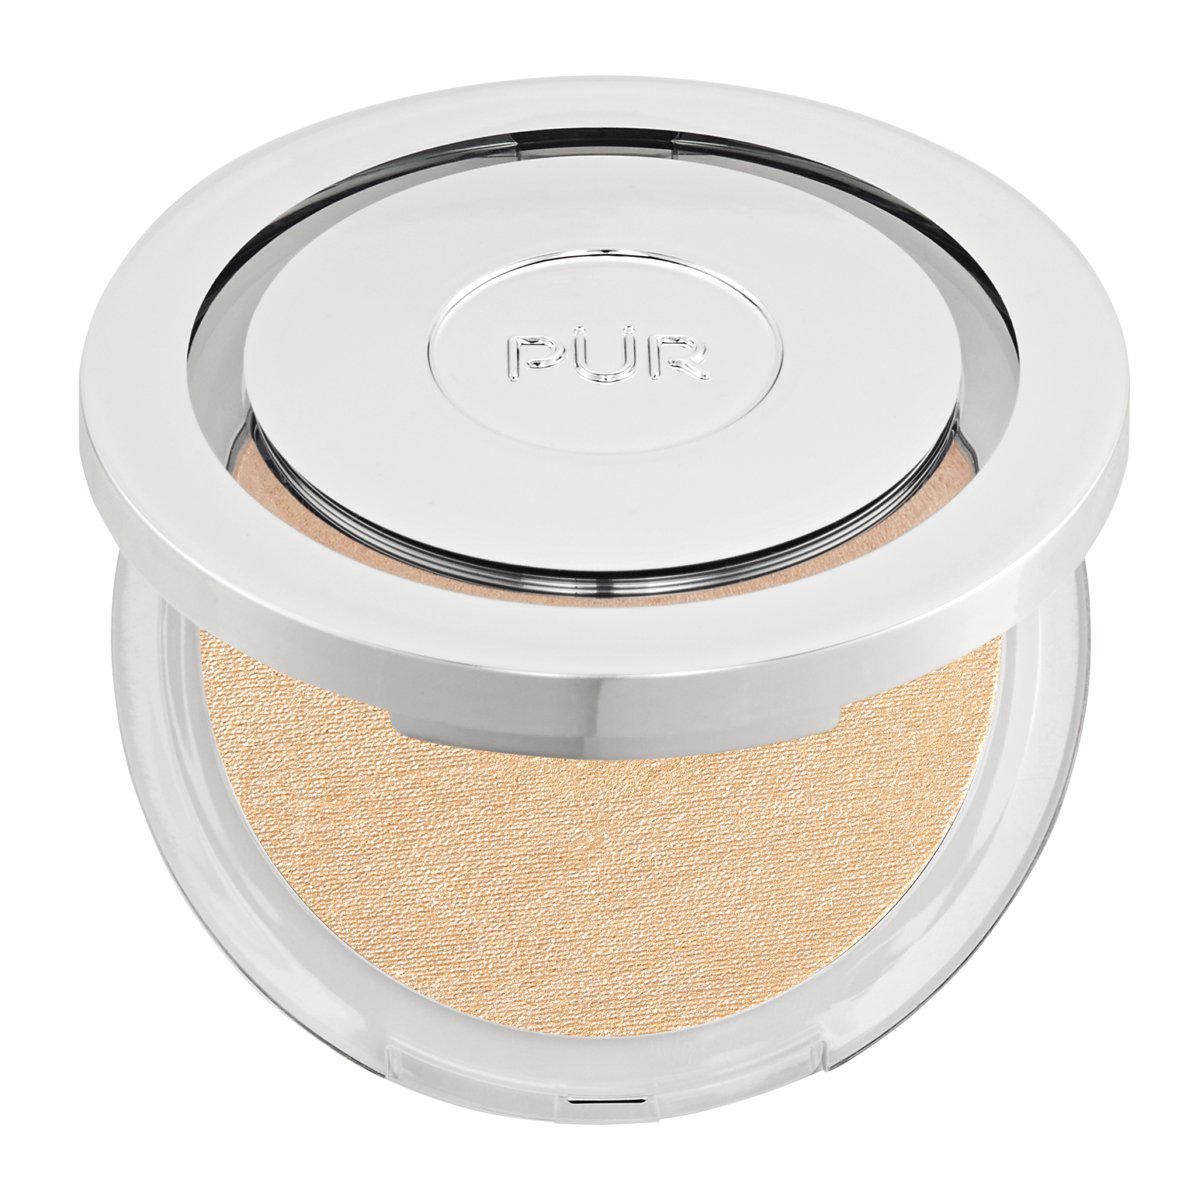 pur afterglow highlighting skin perfecting powder